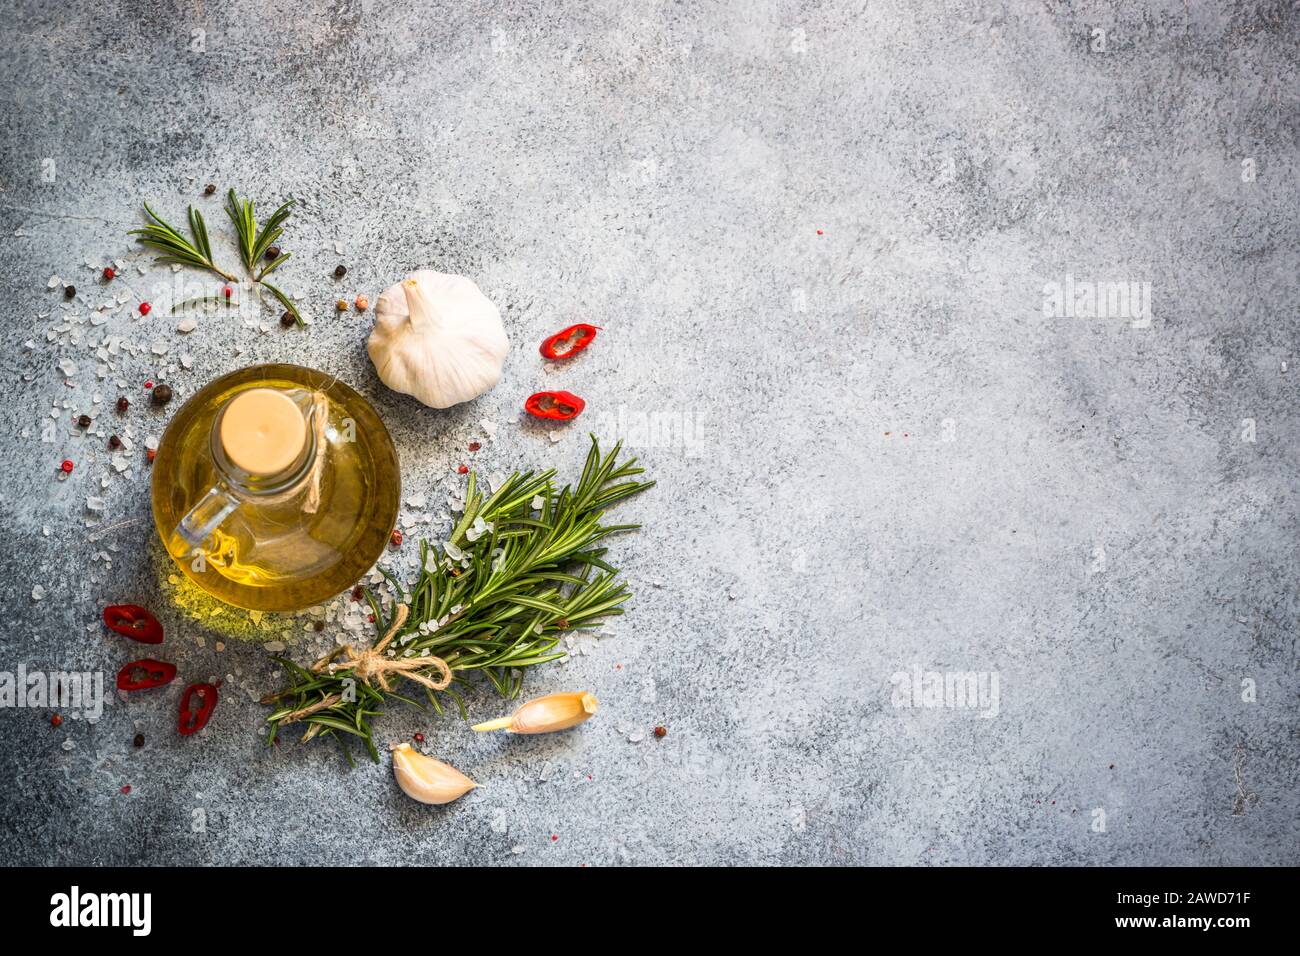 Food cooking background on kitchen table top view. Stock Photo